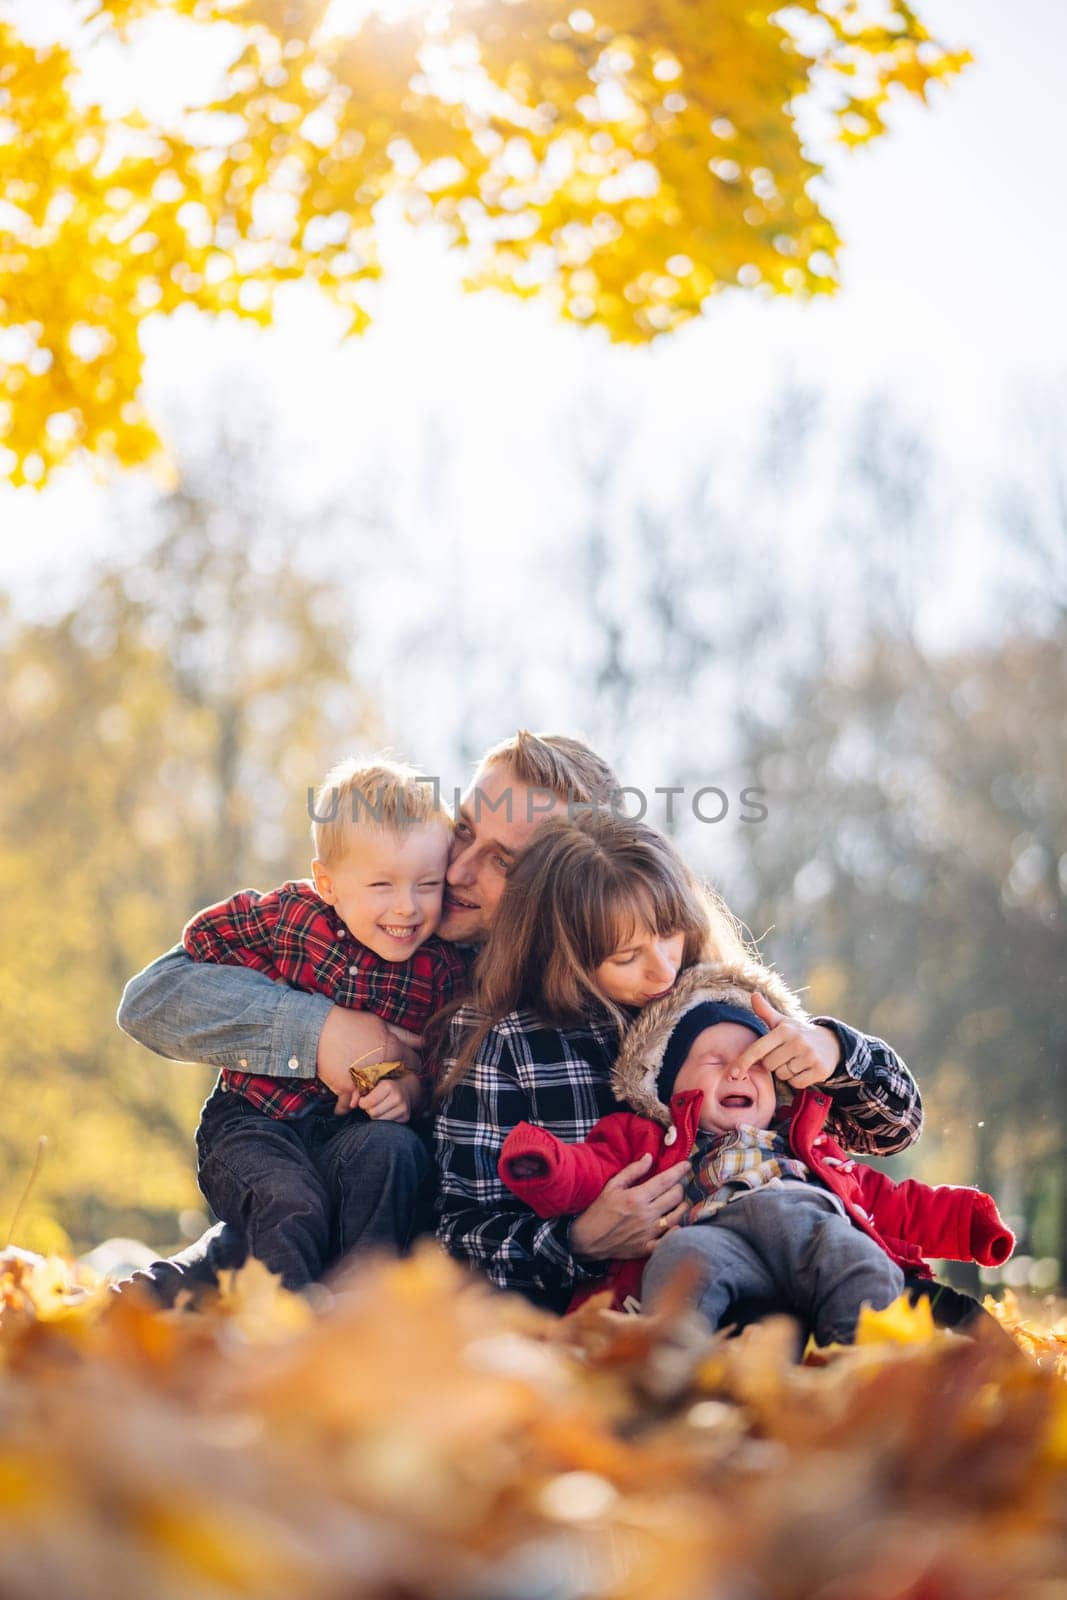 A young family sits in the park on a leafy, sunny autumn day